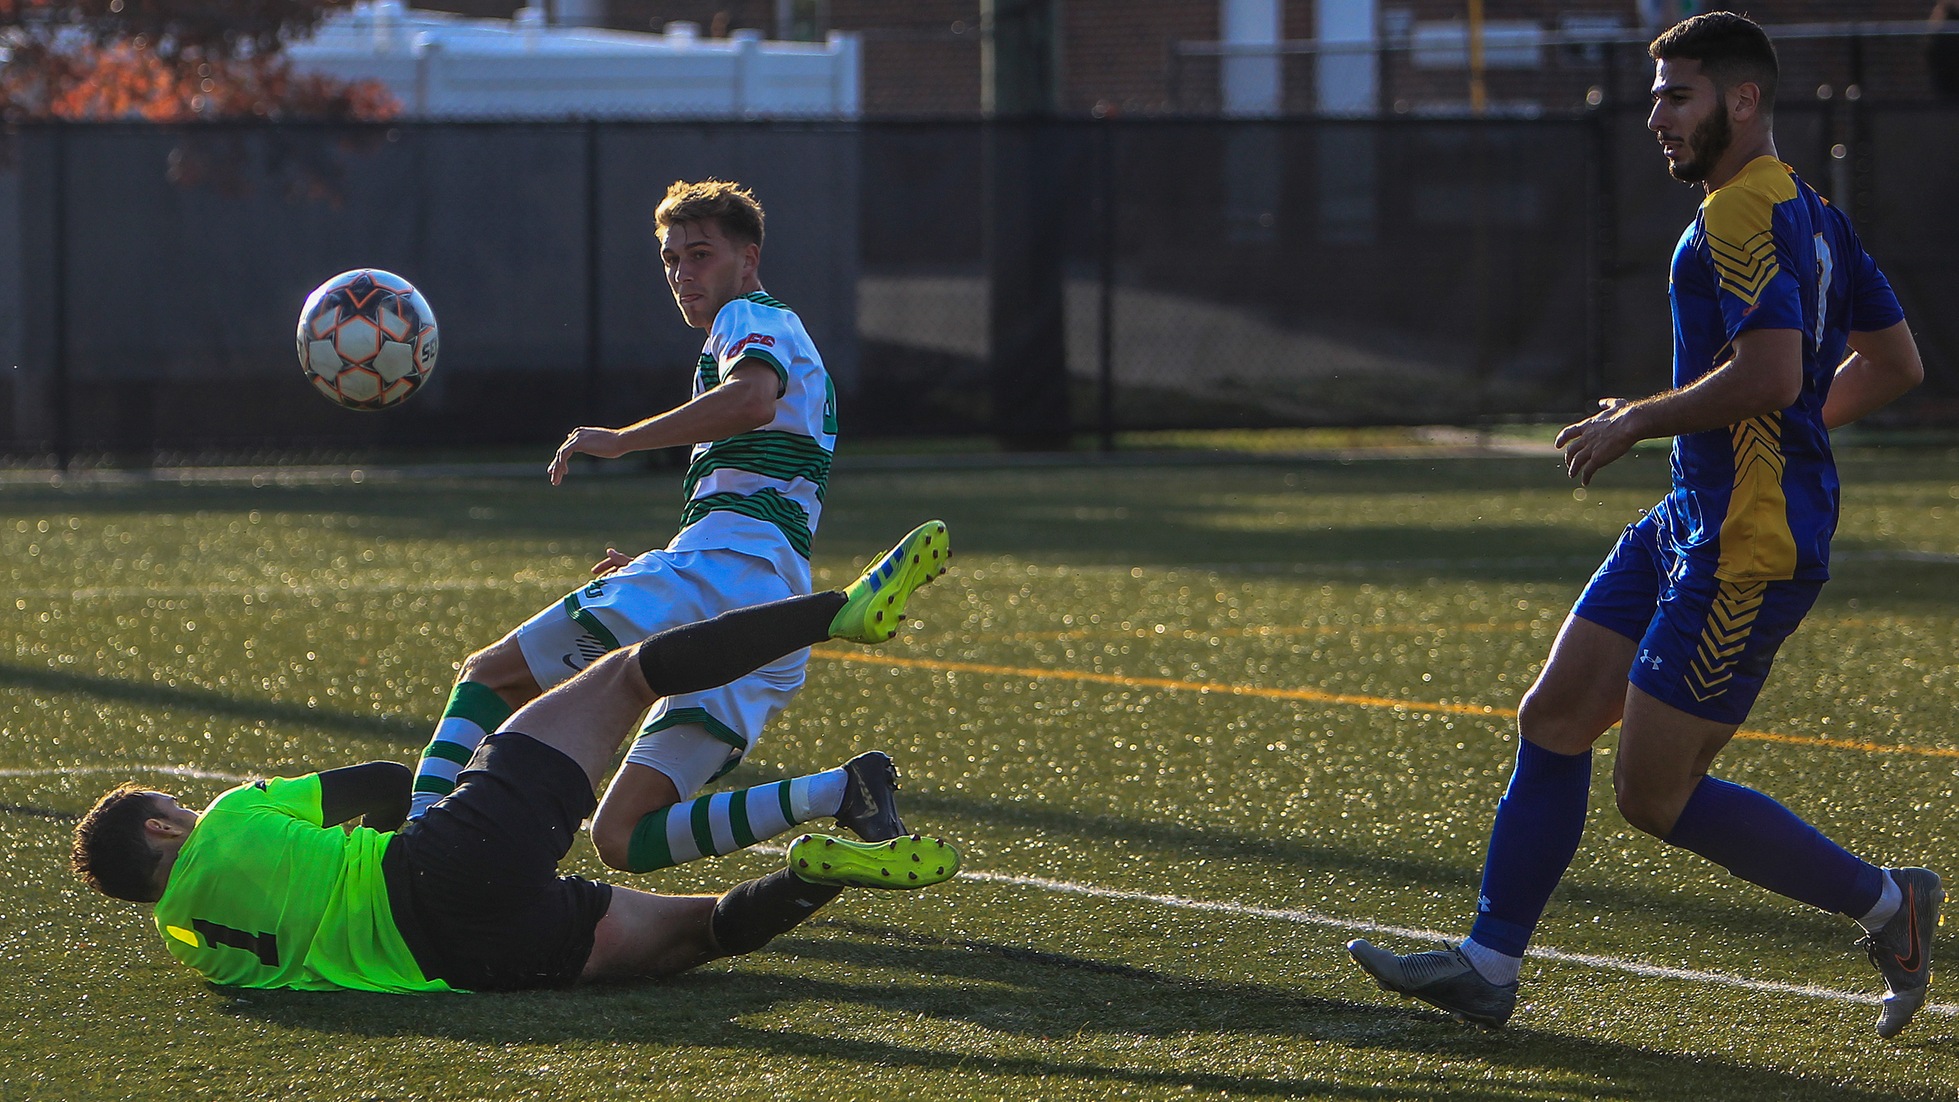 Wilmington University player Lorne Bickley (top) scores a goal against Concordia College goalkeeper Michael Varin  as Concordia?s Luca Wanna (R) follows the play during the first round of the CACC tournament at the Wilmington University Athletic complex in Newark, Delaware, November 11, 2019. Tim Shaffer Photo.